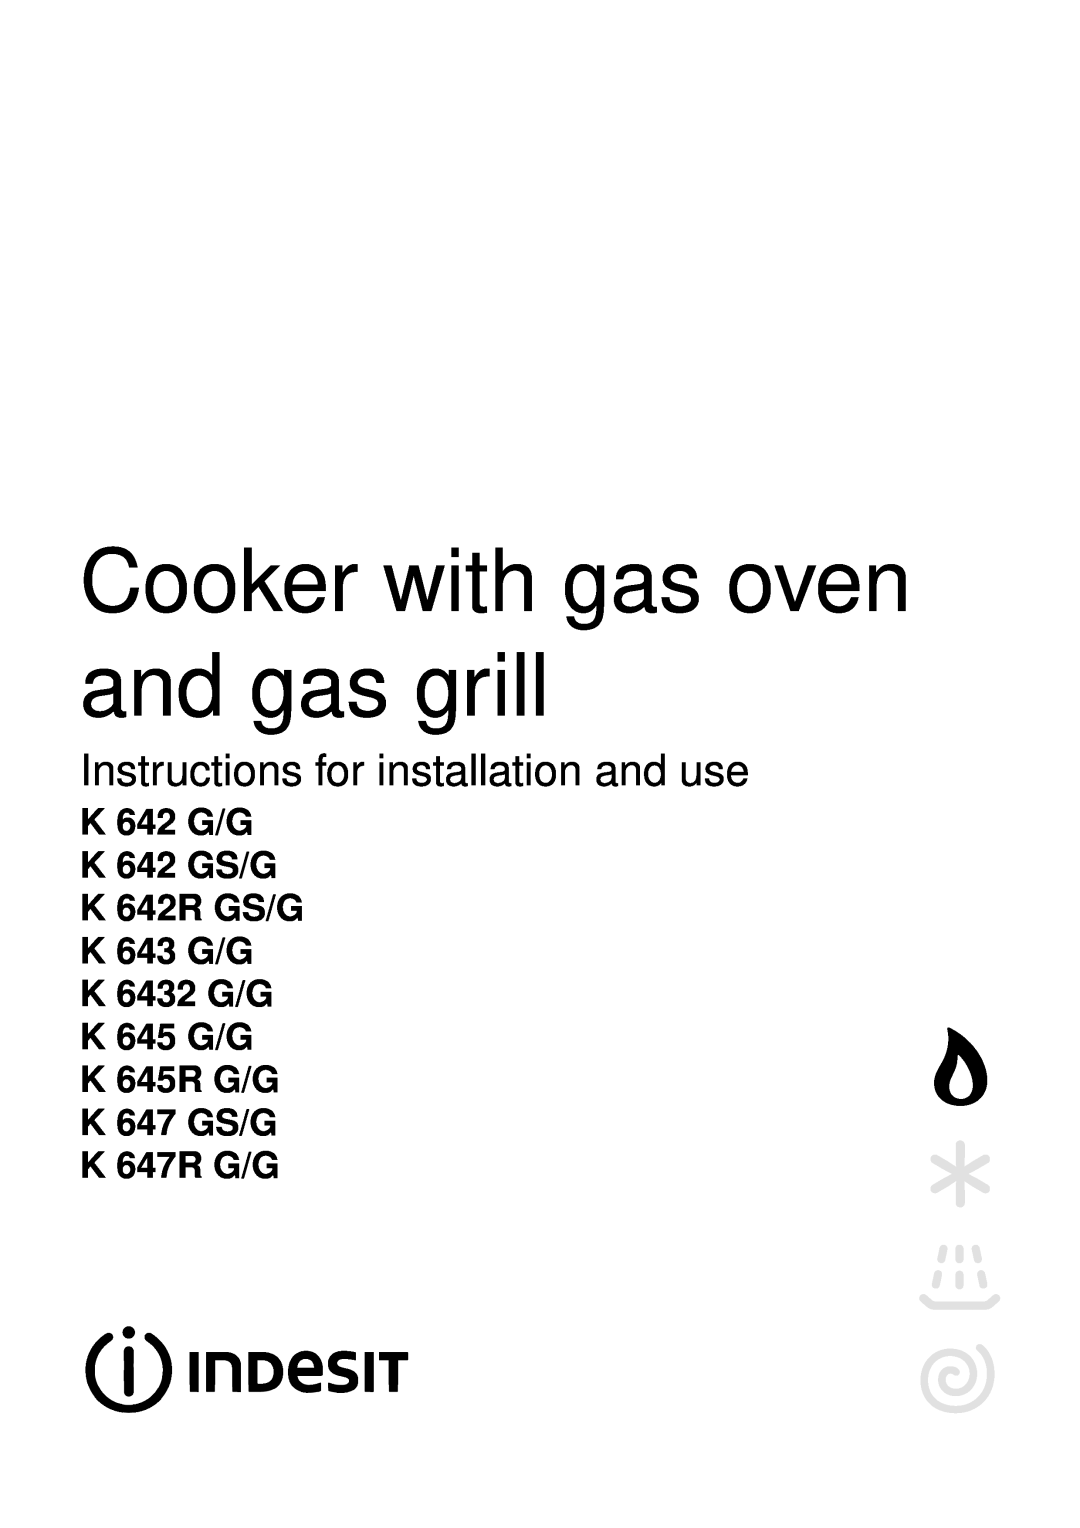 Indesit K 645R G/G, K 647R G/G, K 6432 G/G manual Cooker with gas oven and gas grill, Instructions for installation and use 